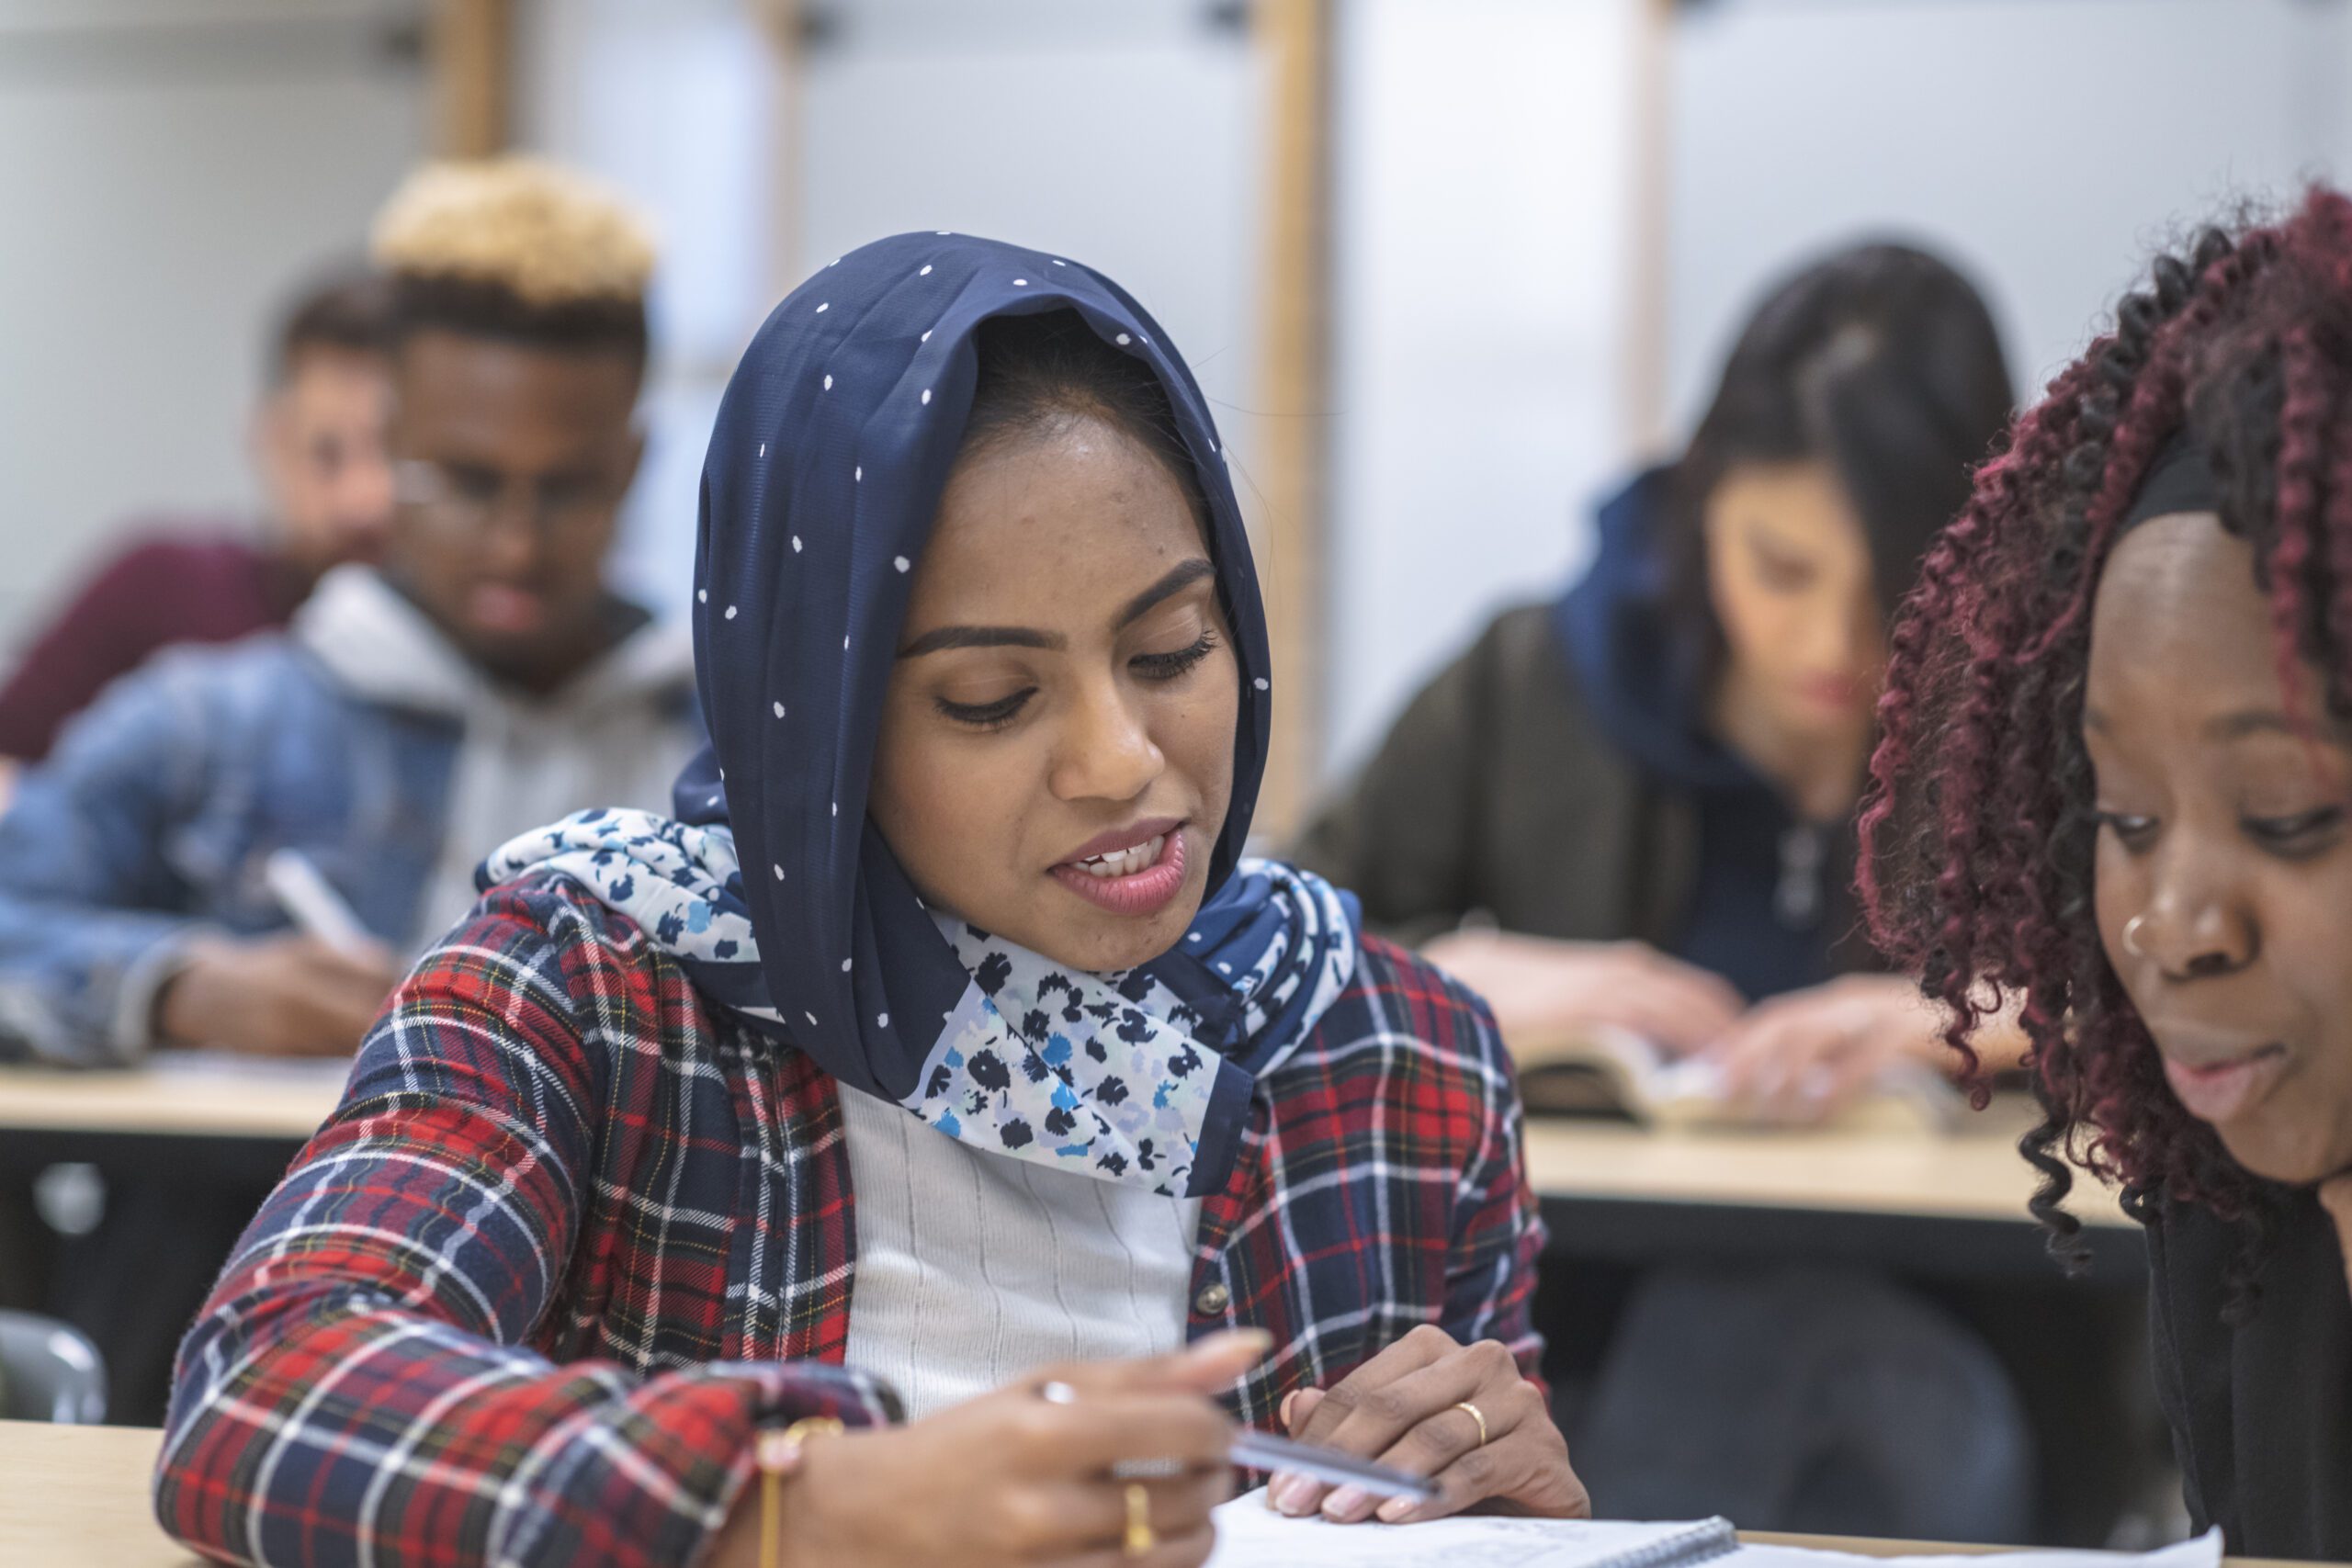 A multi-ethnic group of students sits in a lecture hall listening to their professor off-screen. They are taking notes with the focus being on a female of Indian descent wearing a hijab.